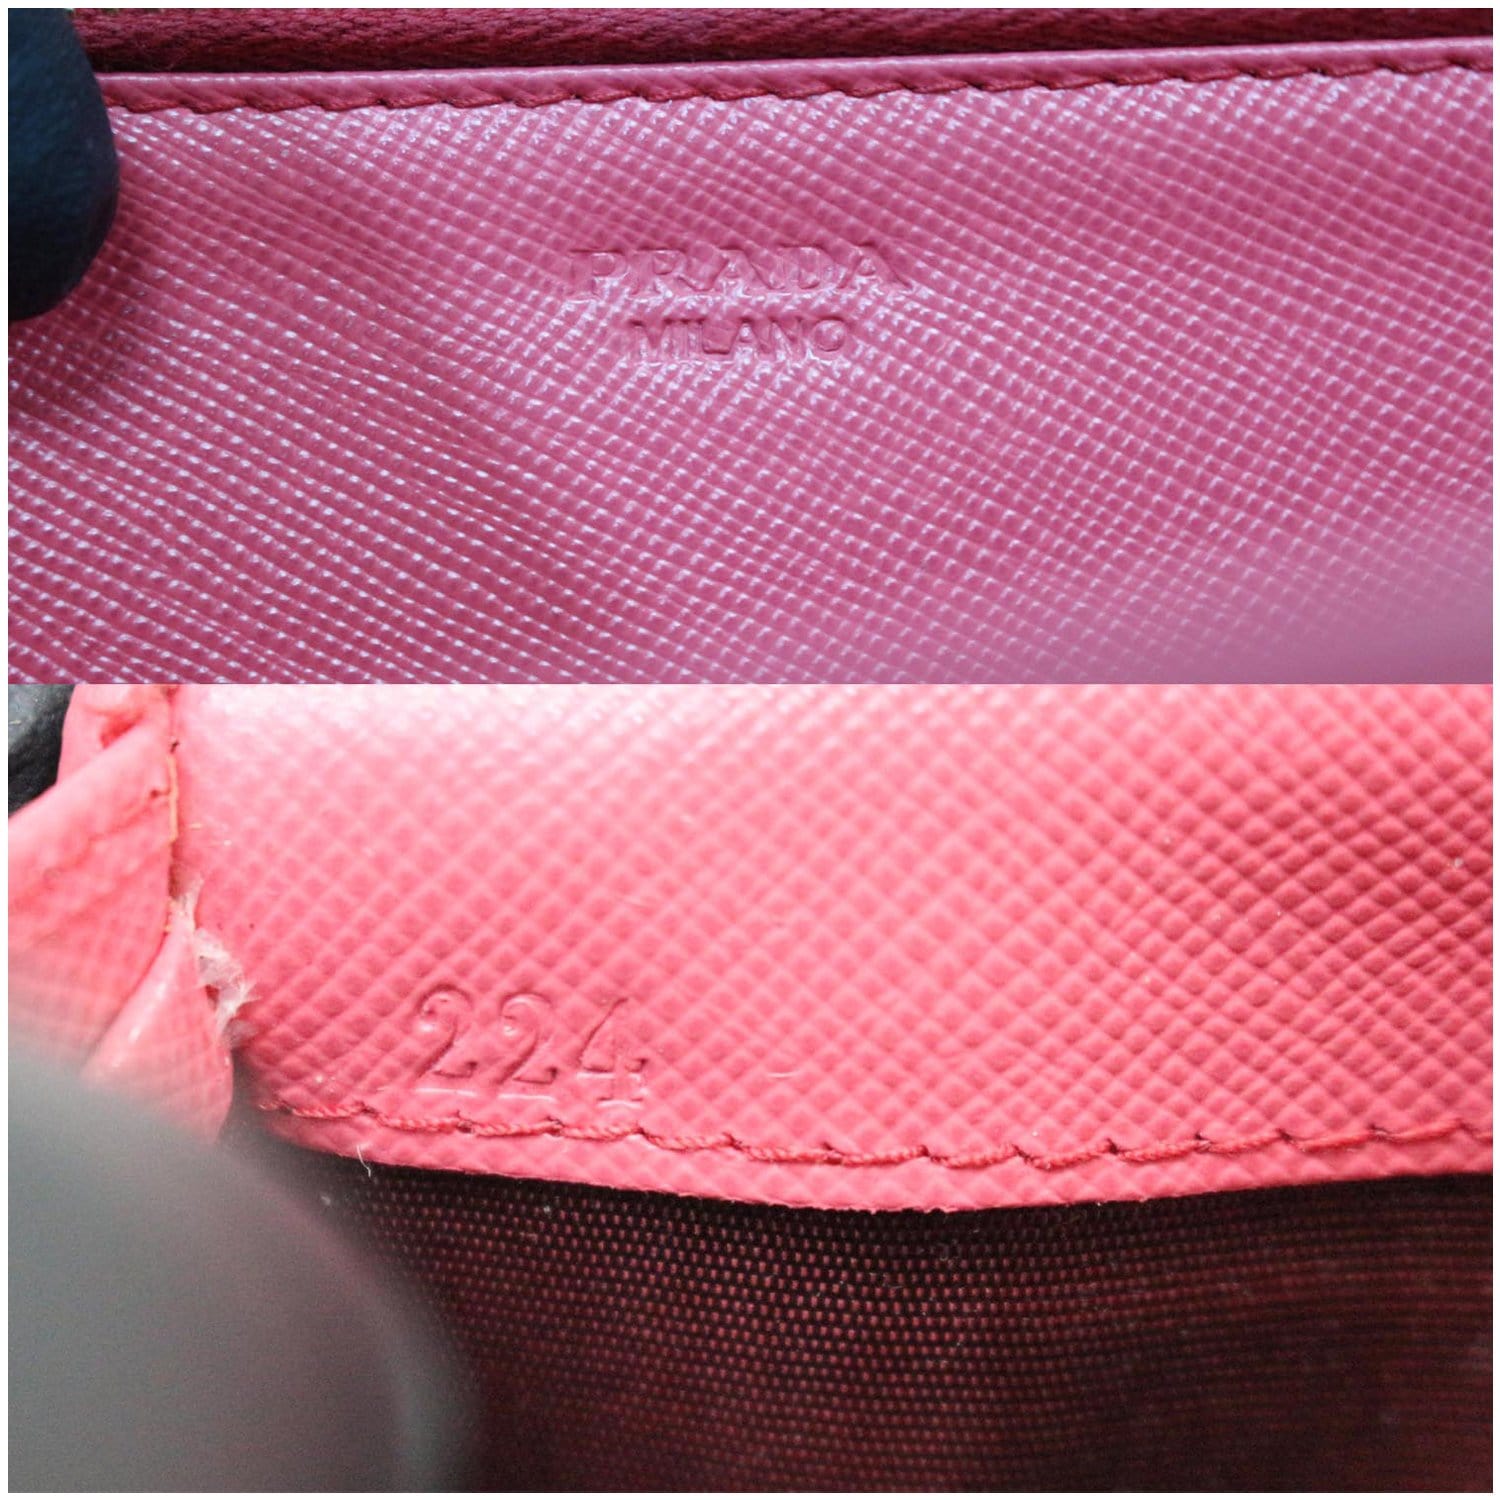 Prada Saffiano Metal Wallet On Chain Clutch 4pt916 Pink Leather Cross Body  Bag For Sale at 1stDibs